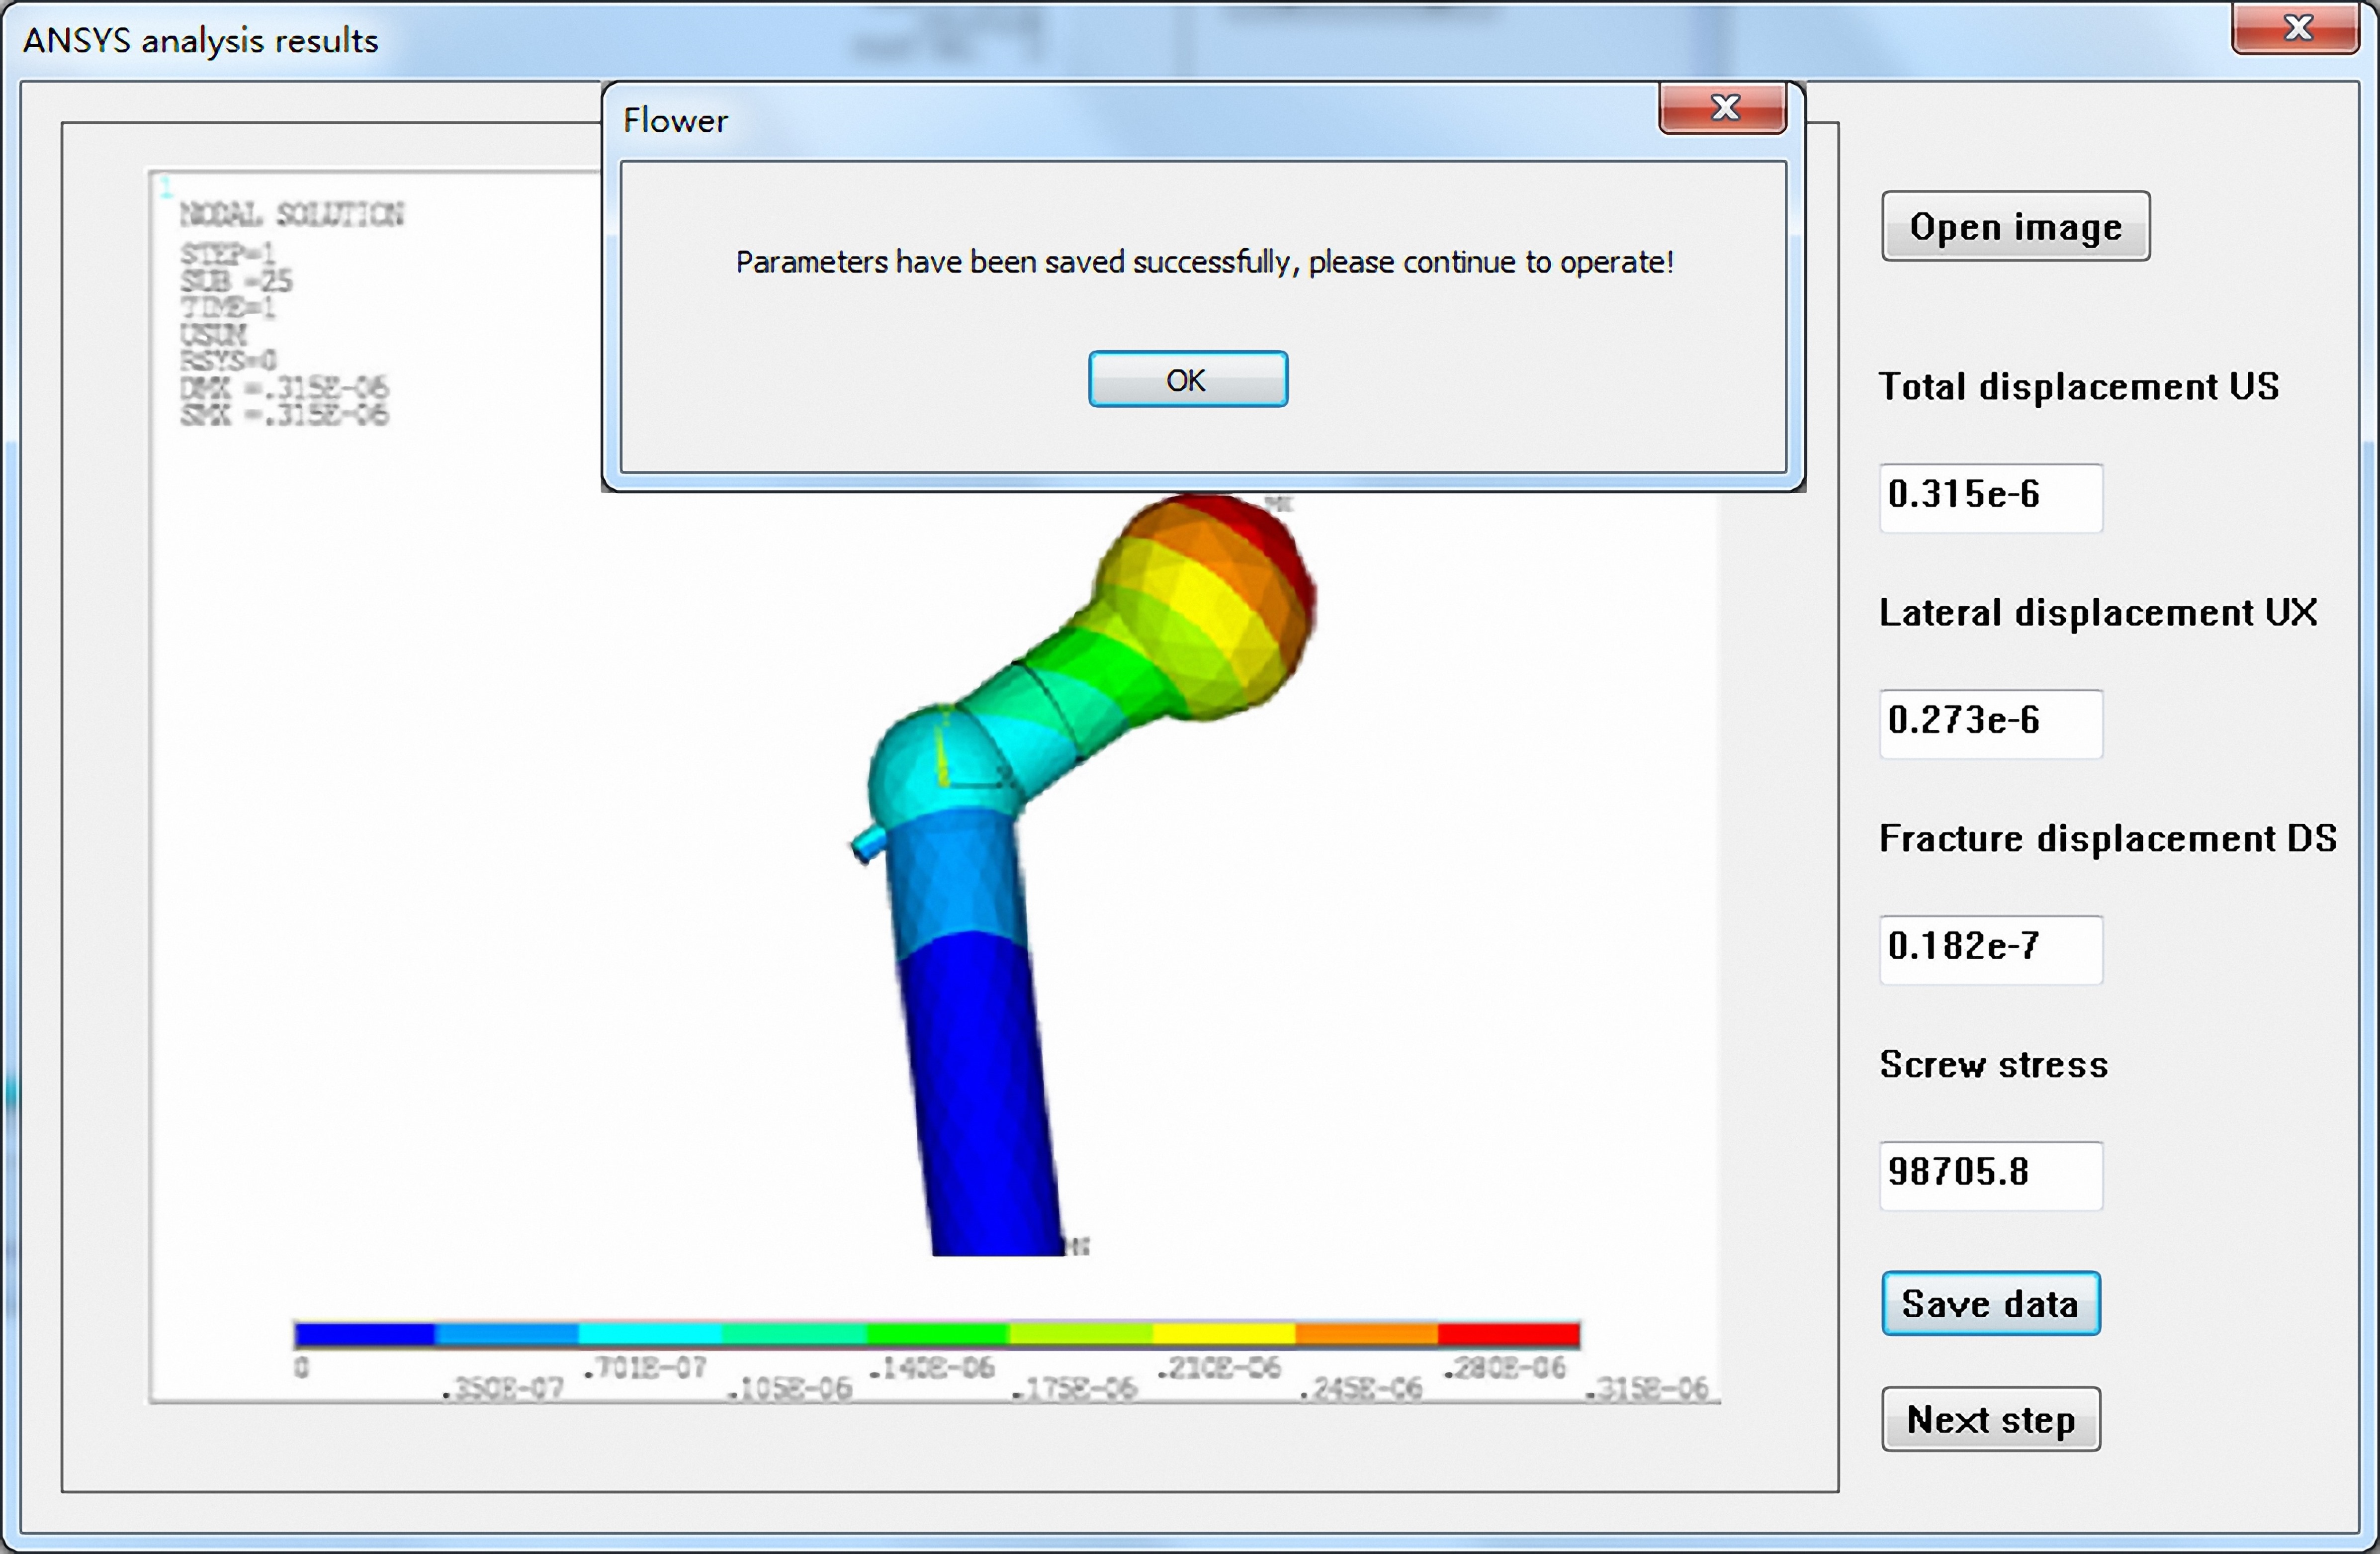 Results storage of ANSYS analysis.